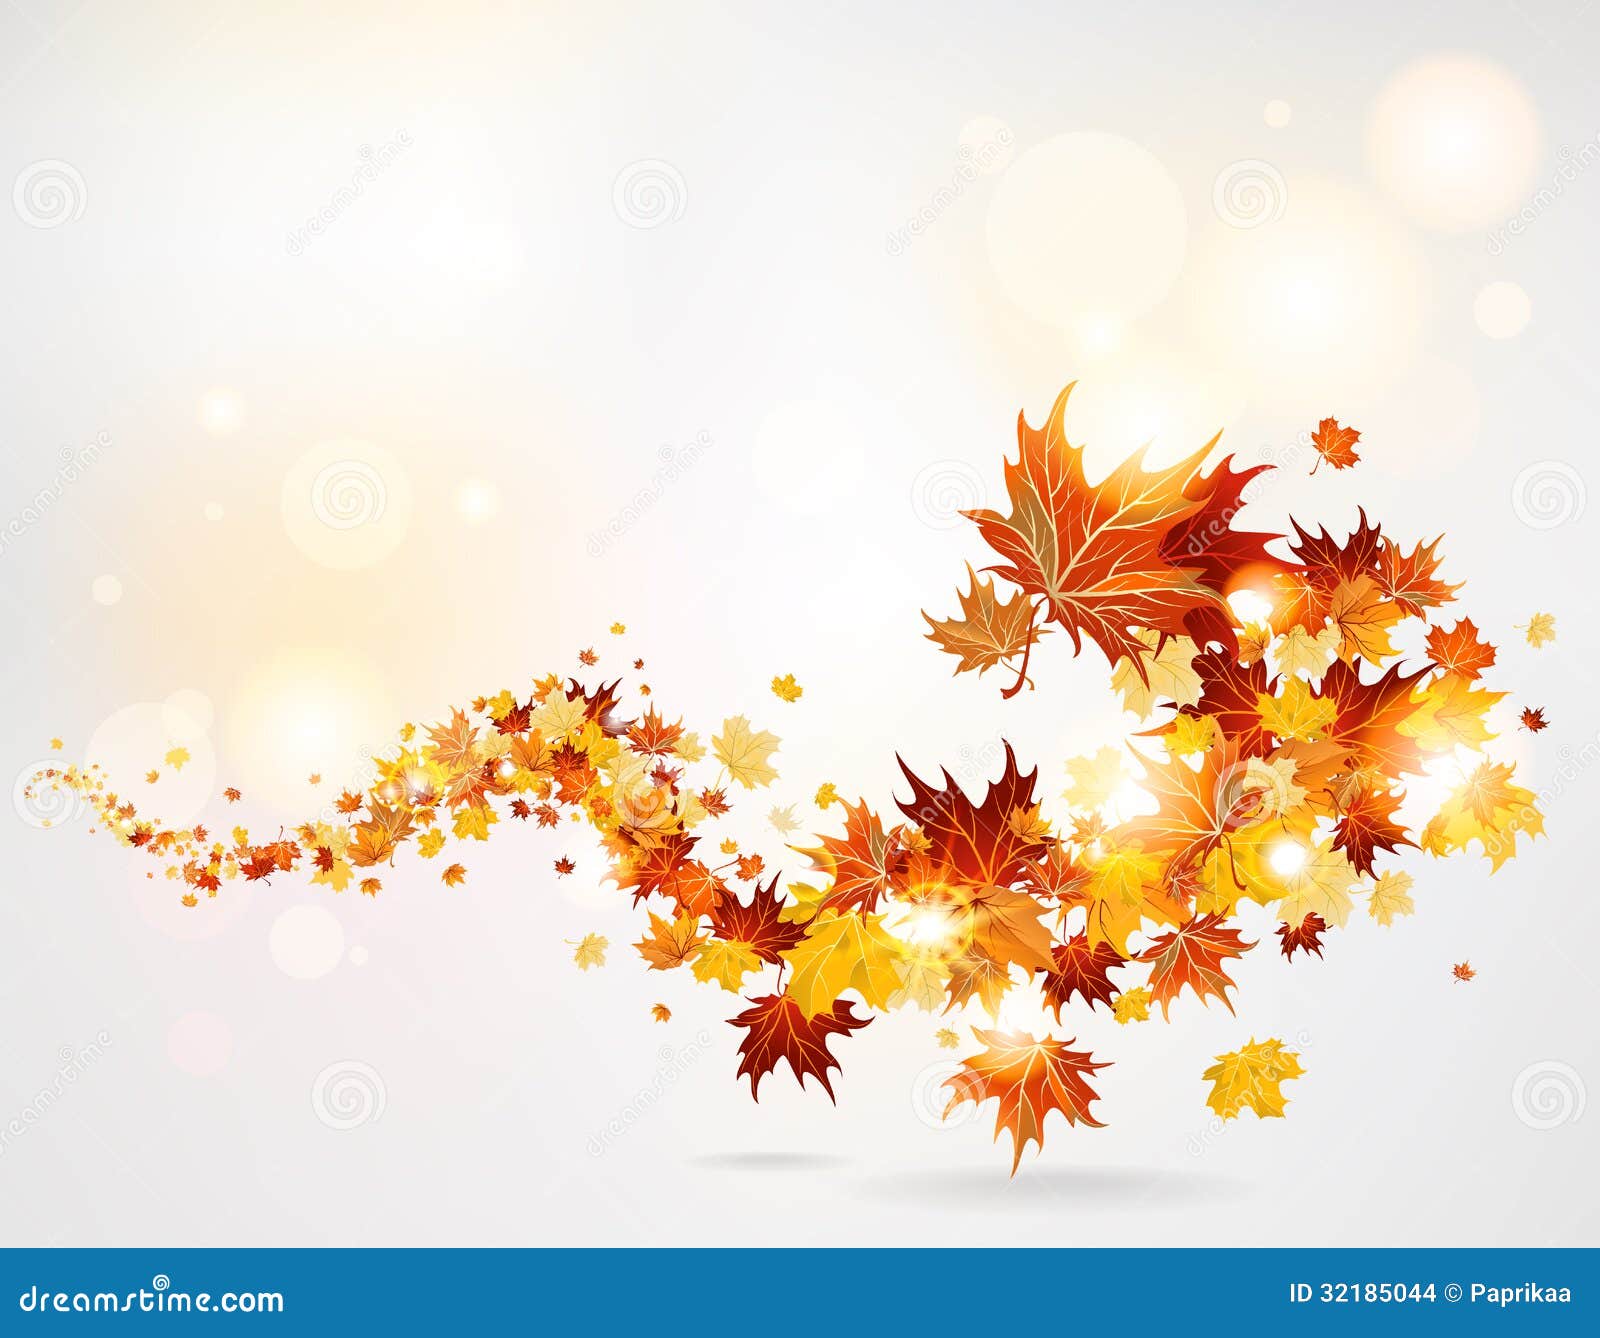 clip art leaves blowing - photo #31